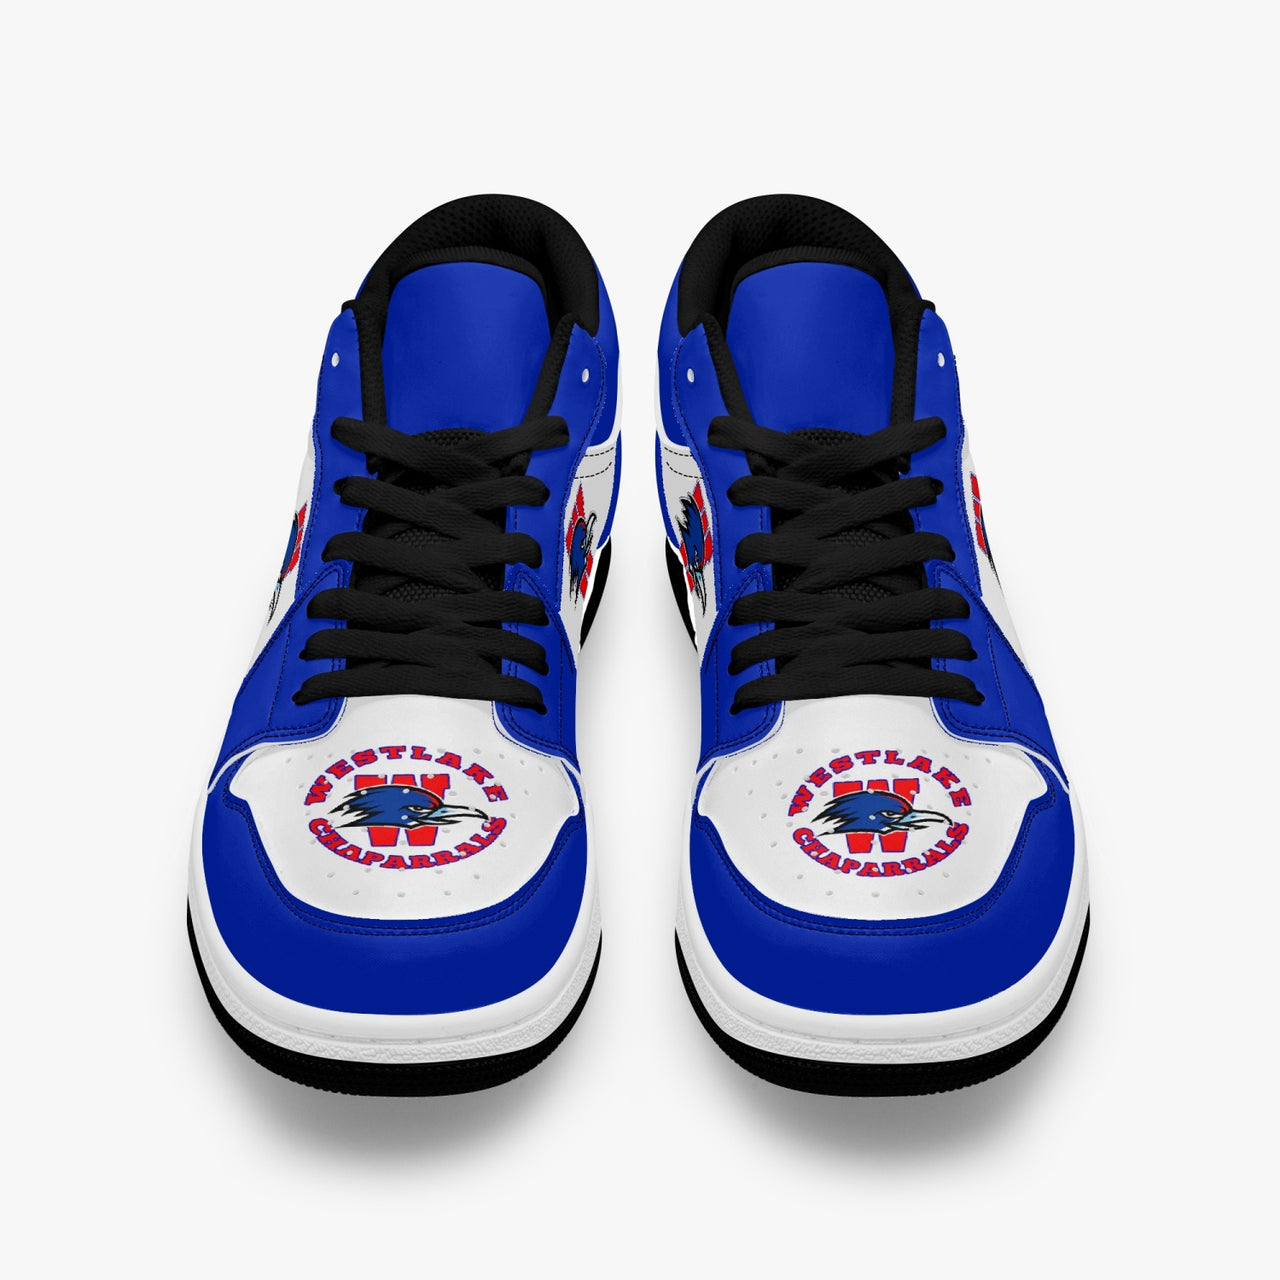 Customize It - Low-Top Leather Sneakers-AJ1